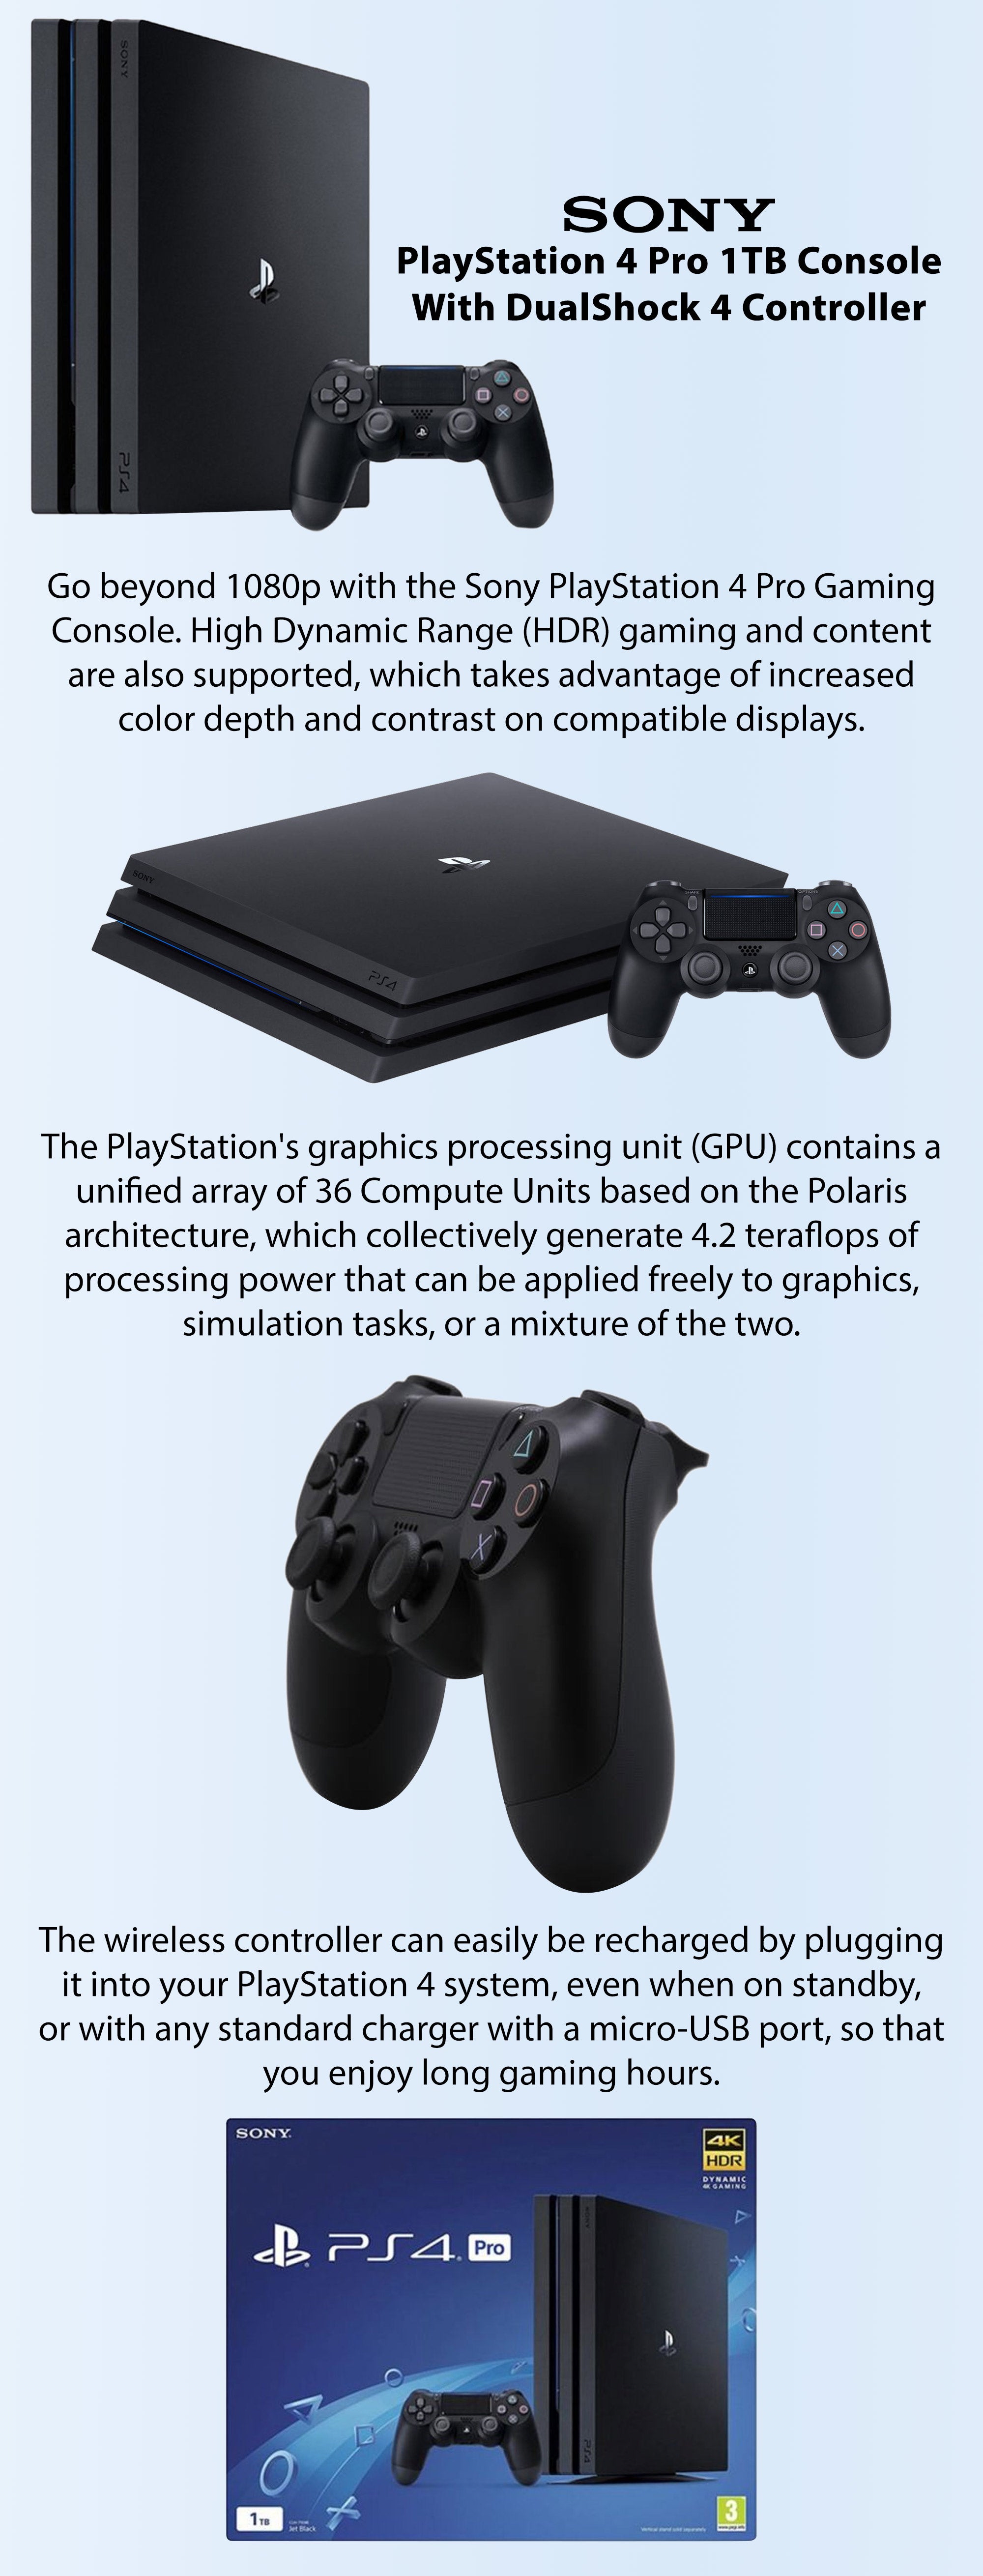 ps4 1tb meaning